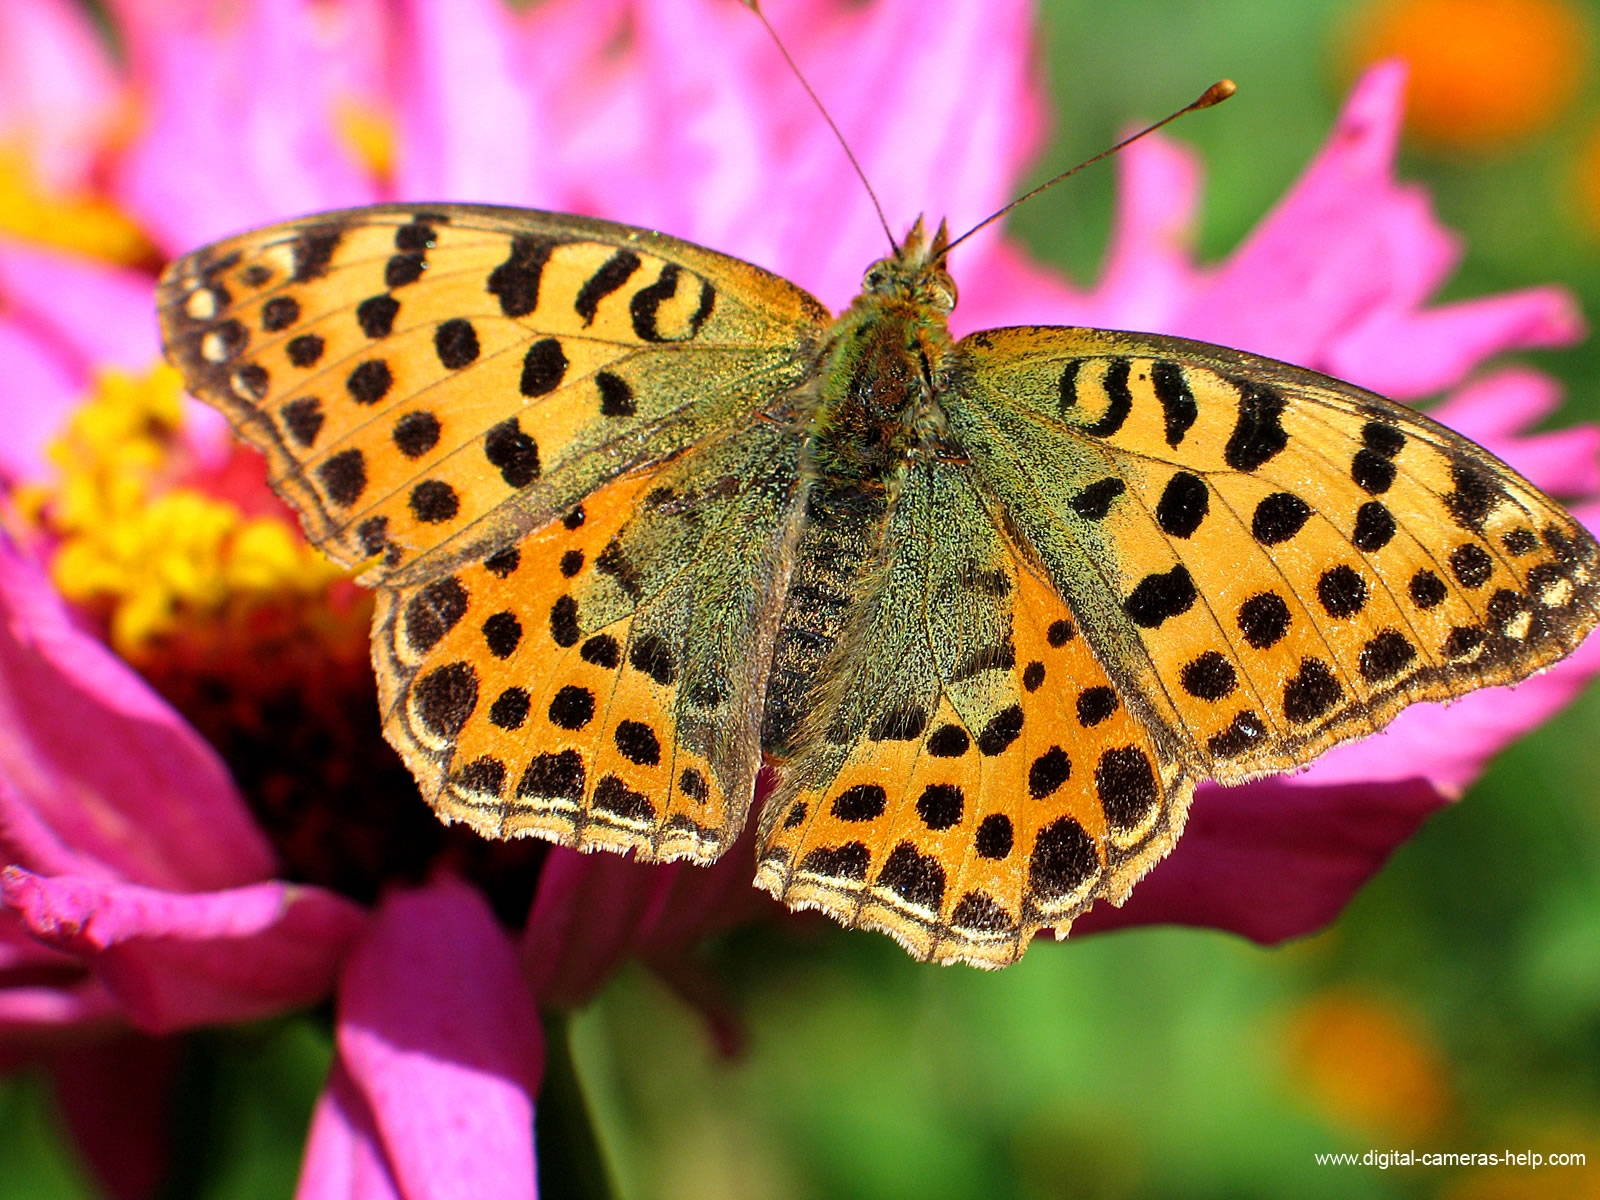 A mesmerizing view of a colorful insect - perfect for nature lovers and desktop backgrounds.